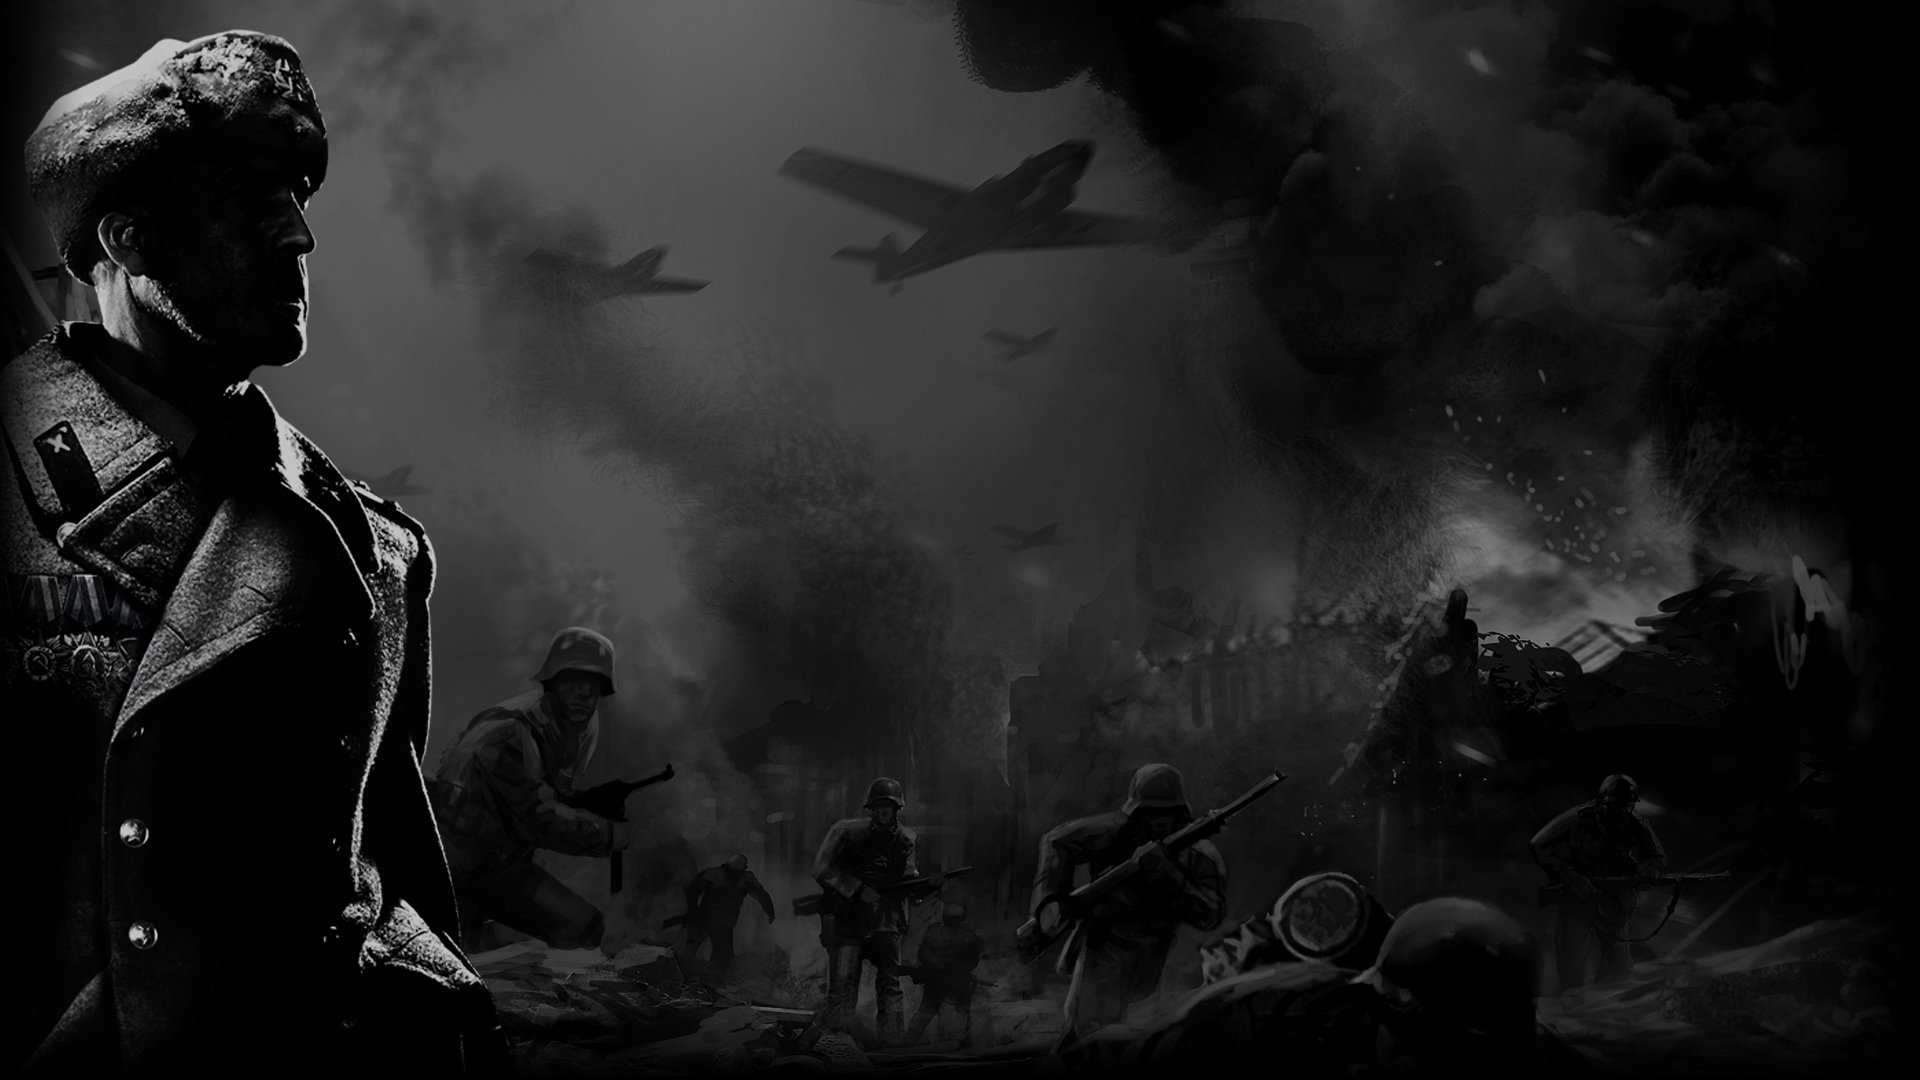 company of heroes 2 download